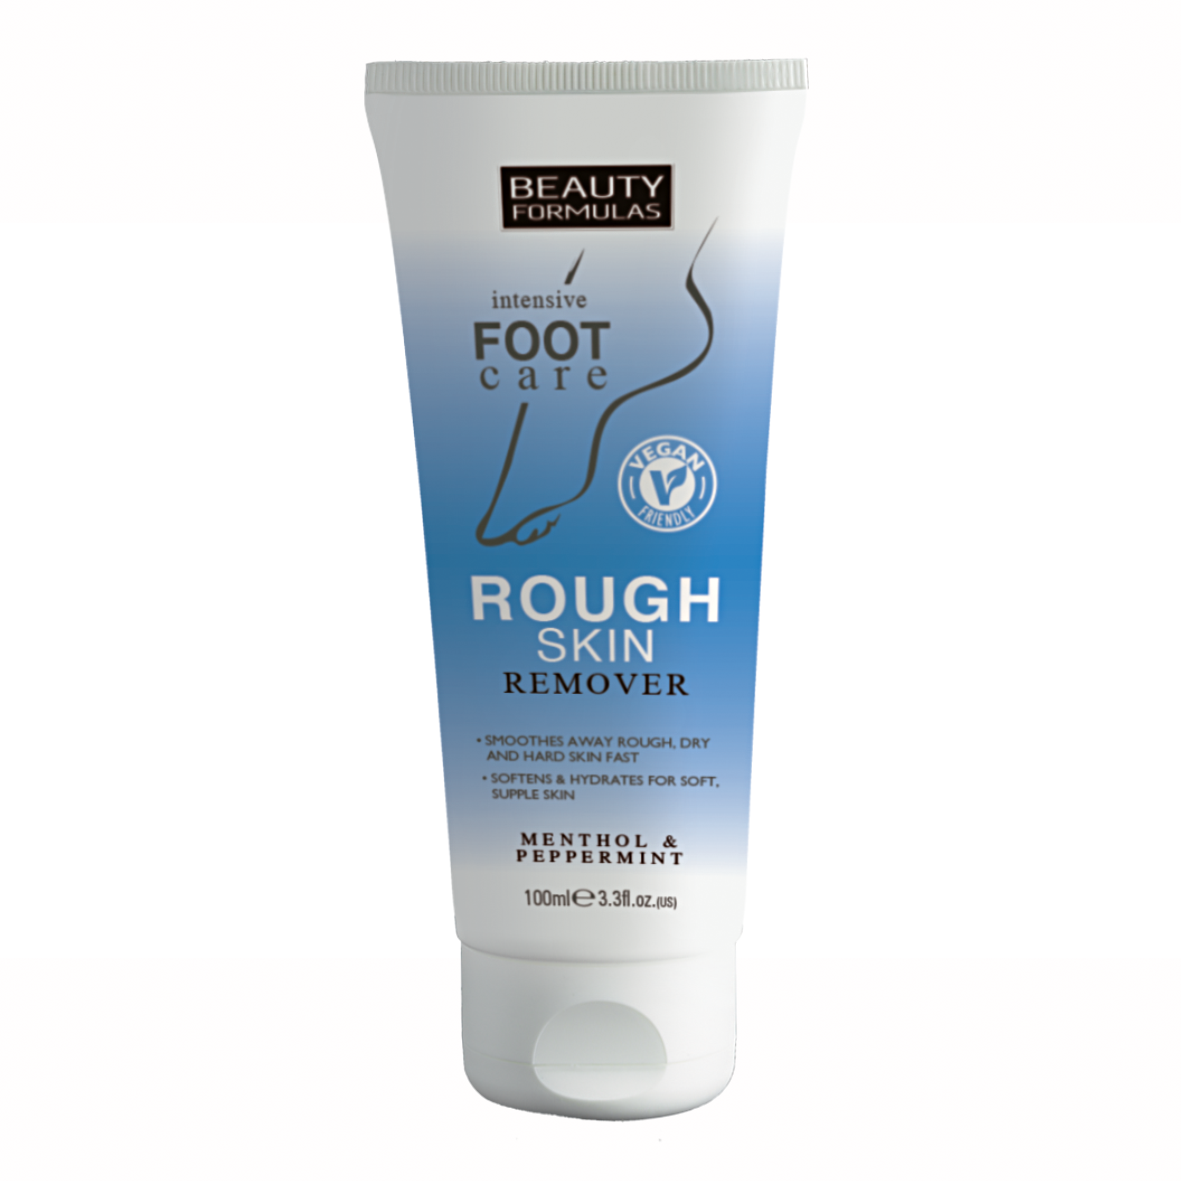 Intensive foot care rough skin remover.